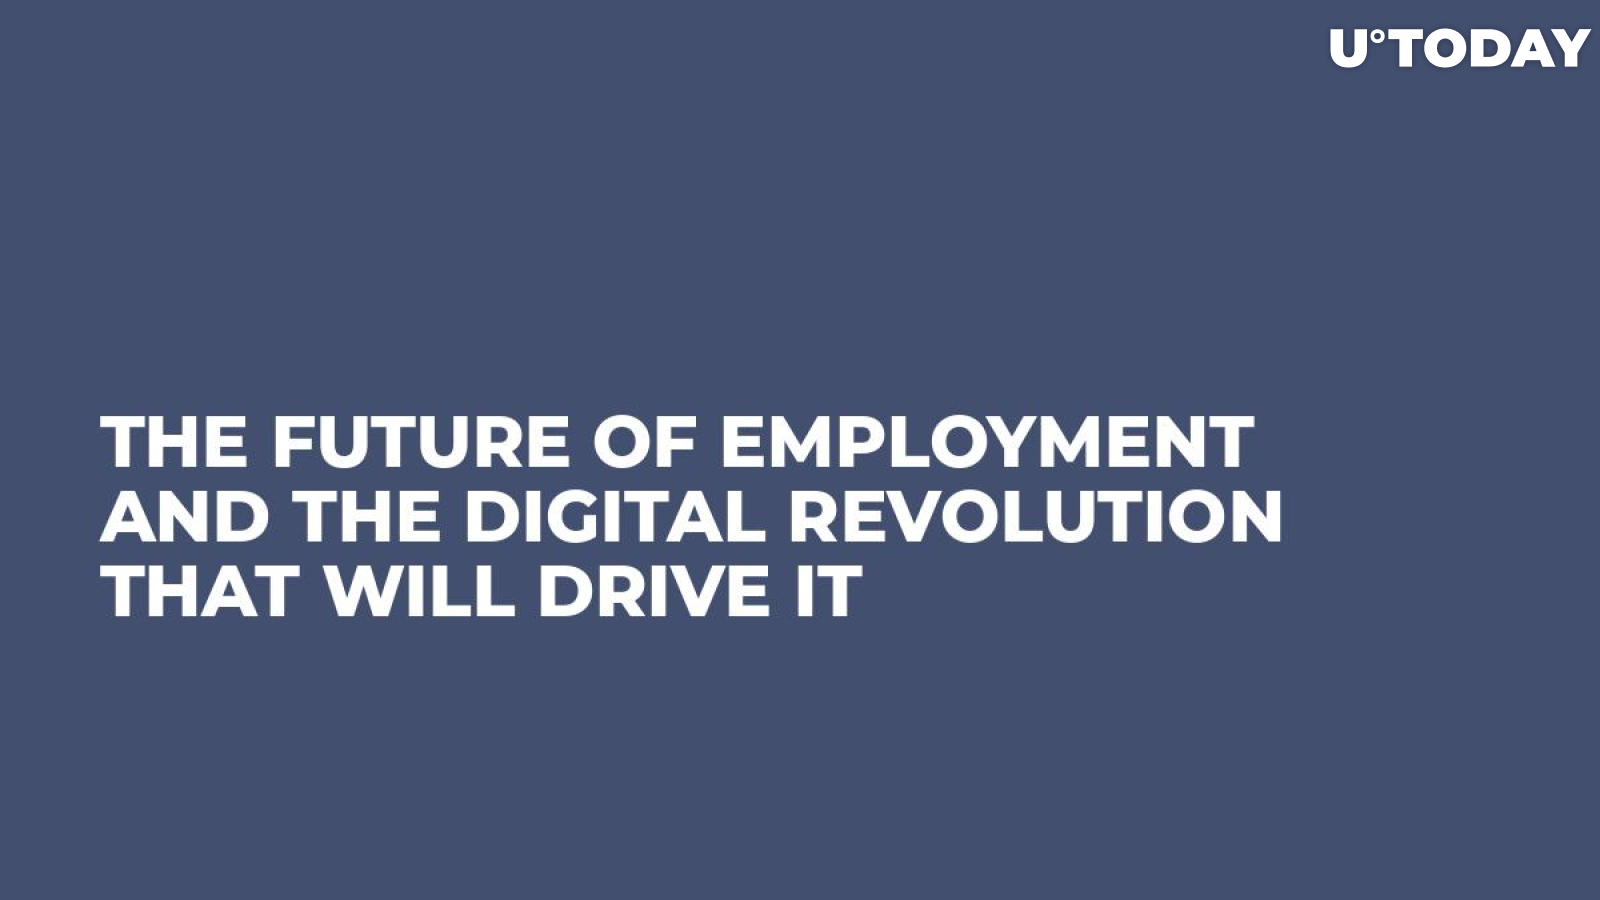 The Future of Employment and the Digital Revolution That Will Drive It